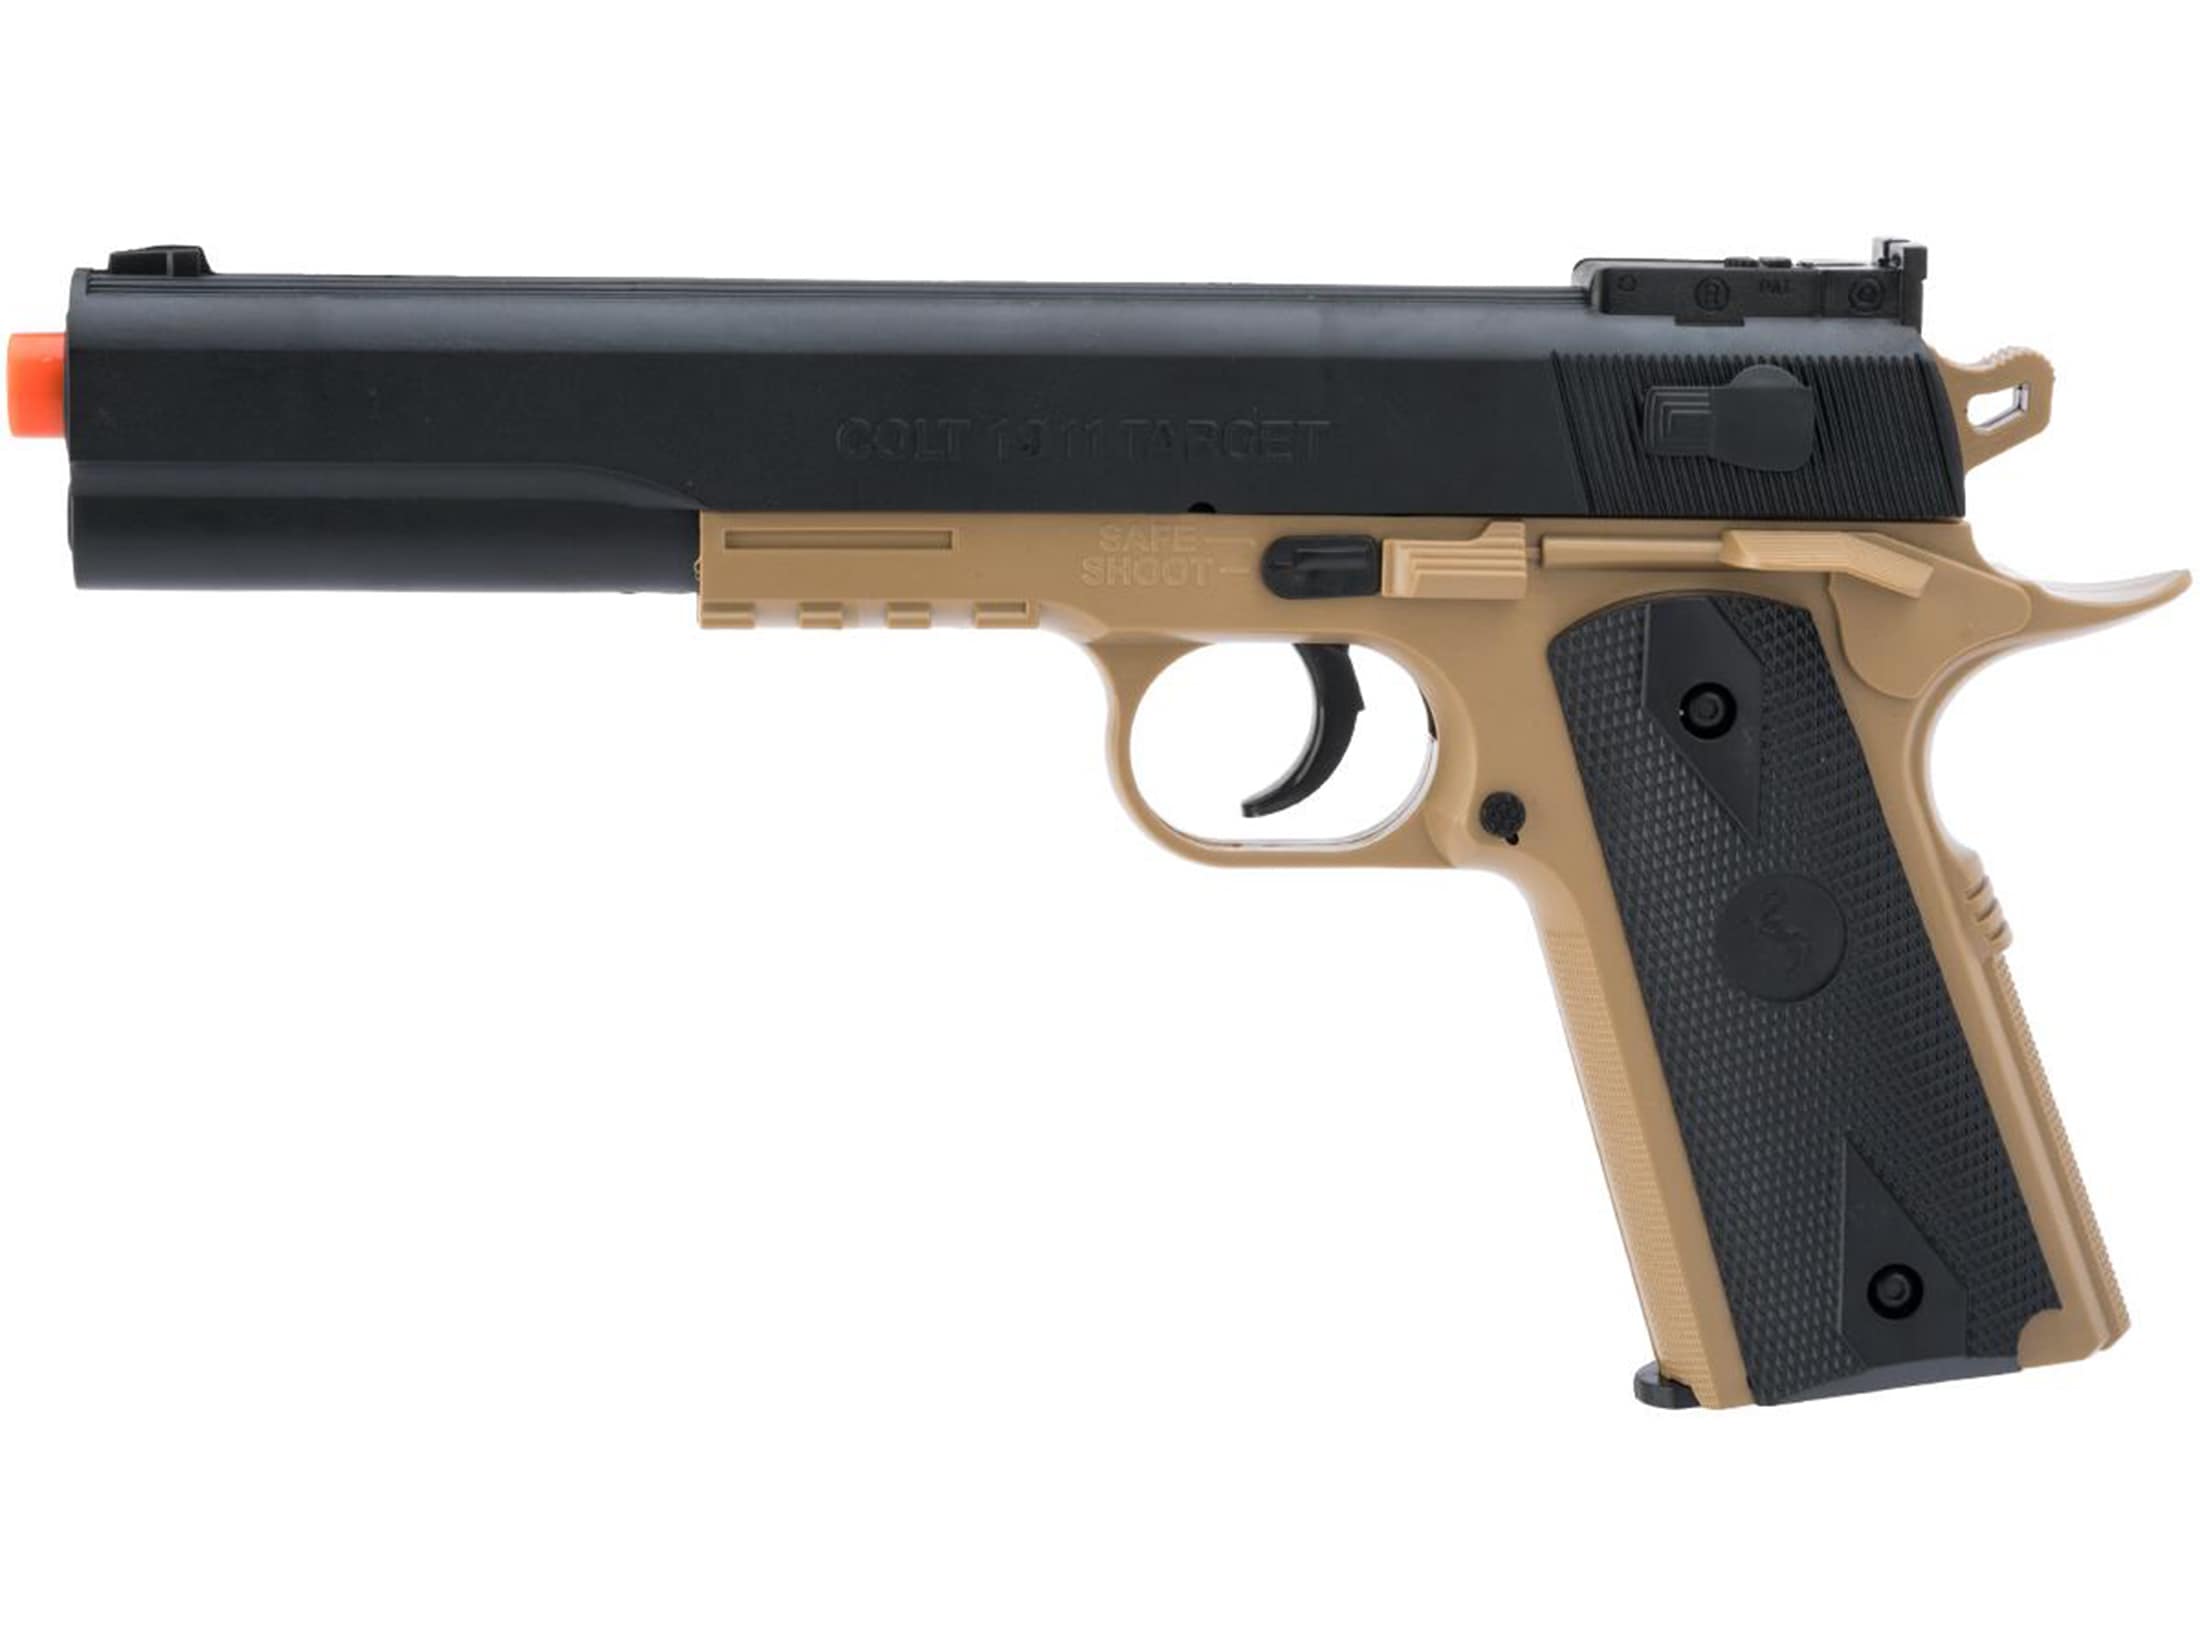 Colt 1911 Kit Airsoft Pistol 6mm BB Spring Powered Single Shot For Sale